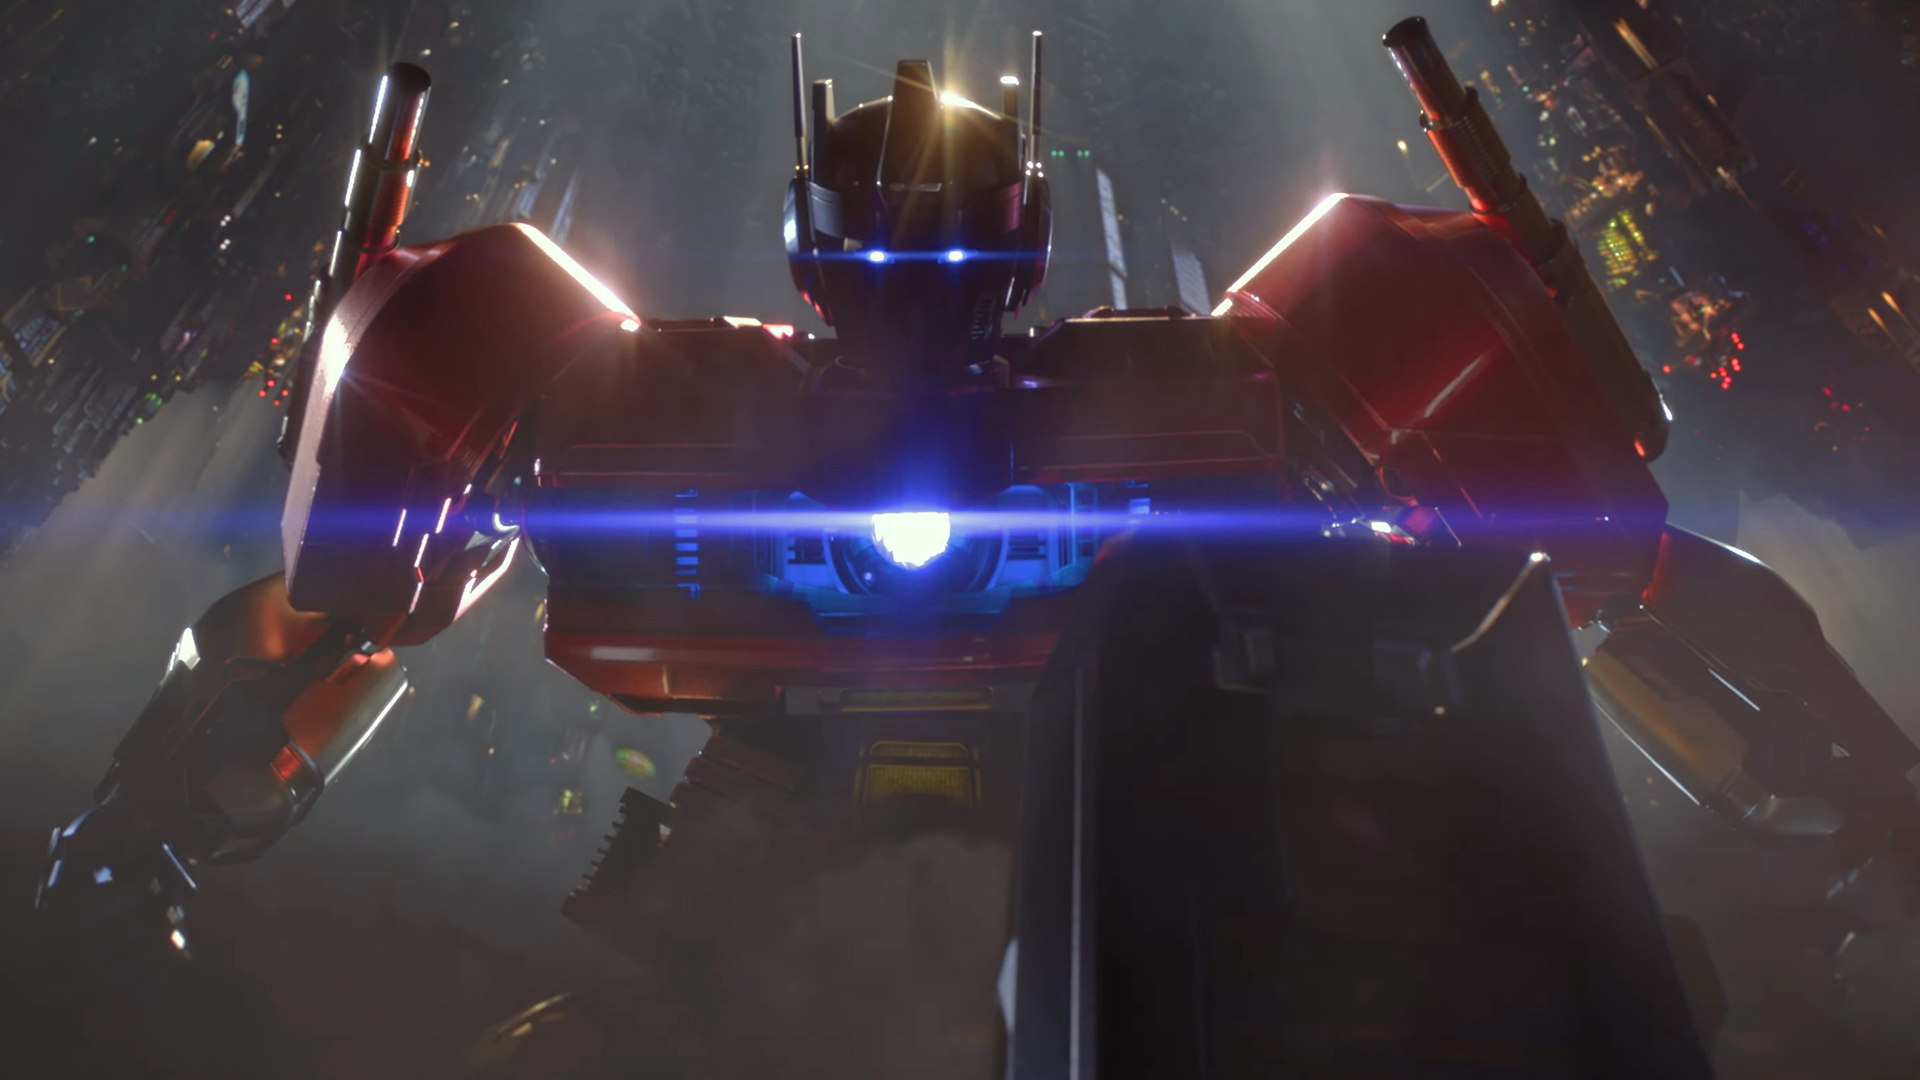 First Transformers One trailer shows Optimus Prime and Megatron as best buds